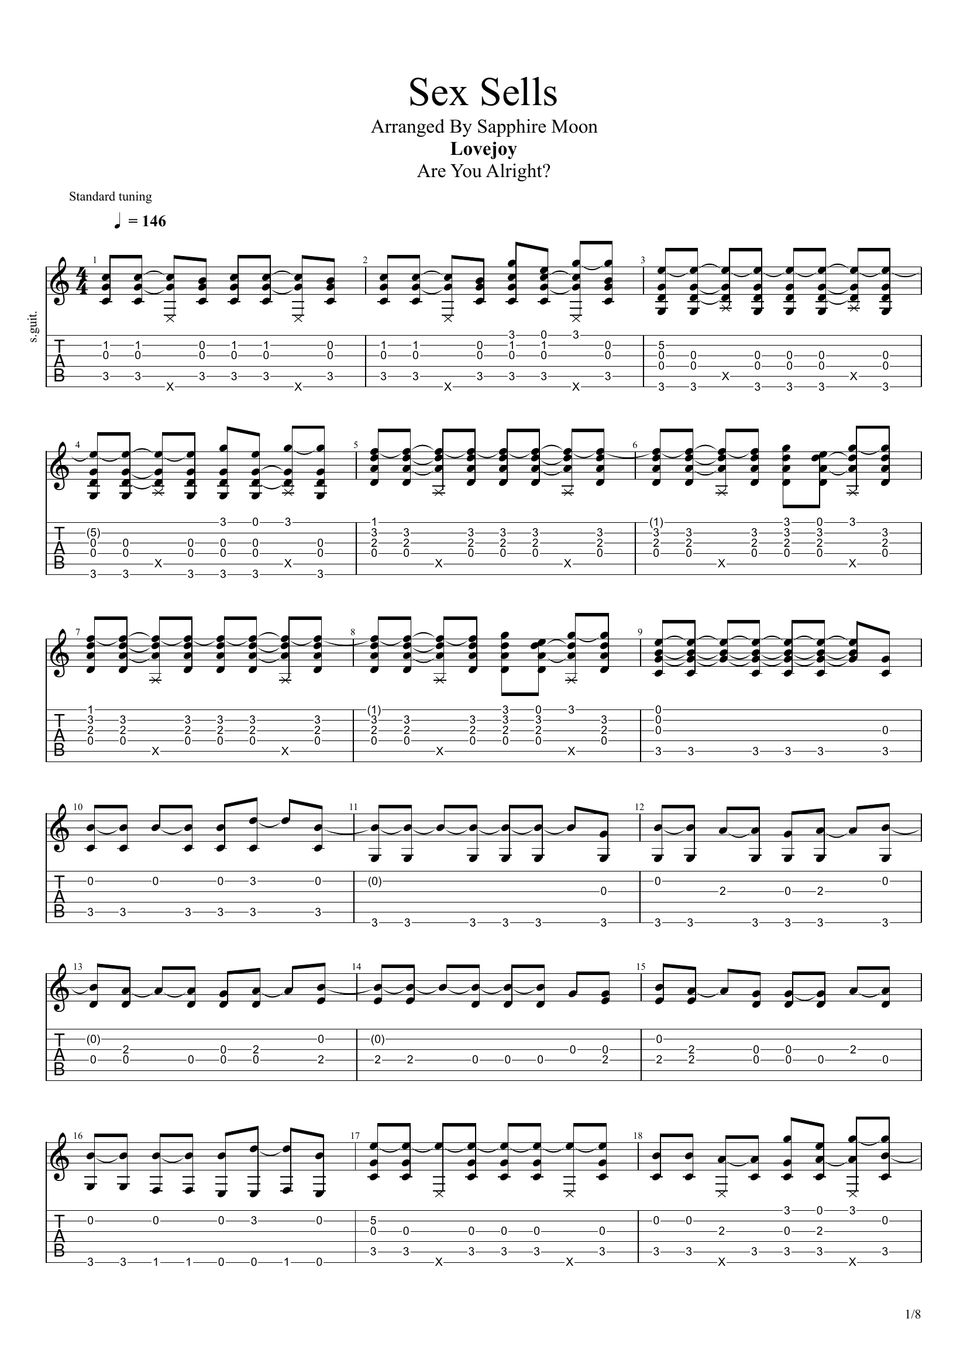 Lovejoy Sex Sells Fingerstyle Guitar Tab 단선 악보 By Sapphire Moon 